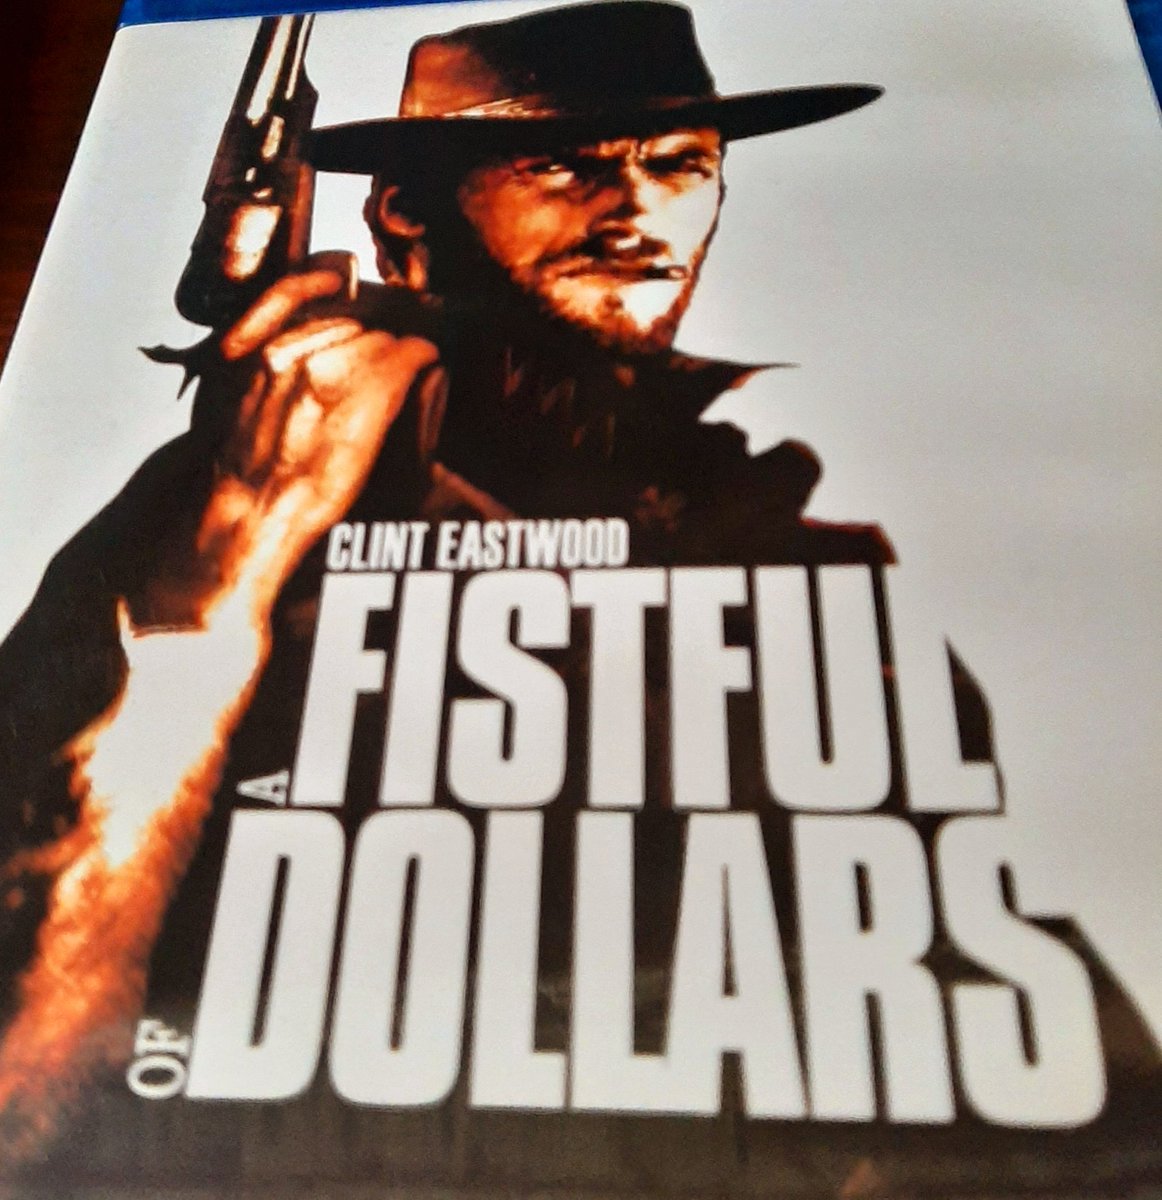 One of tonight's films, Sergio Leone's gritty 'spaghetti western' A Fistful of Dollars staring Clint Eastwood.
🤠👢🤠👢🤠👢🤠👢🤠👢🤠
#themanwithnoname #clinteastwood #sergioleone #spaghettiwestern #bookmarkquinn #afistfulofdollars